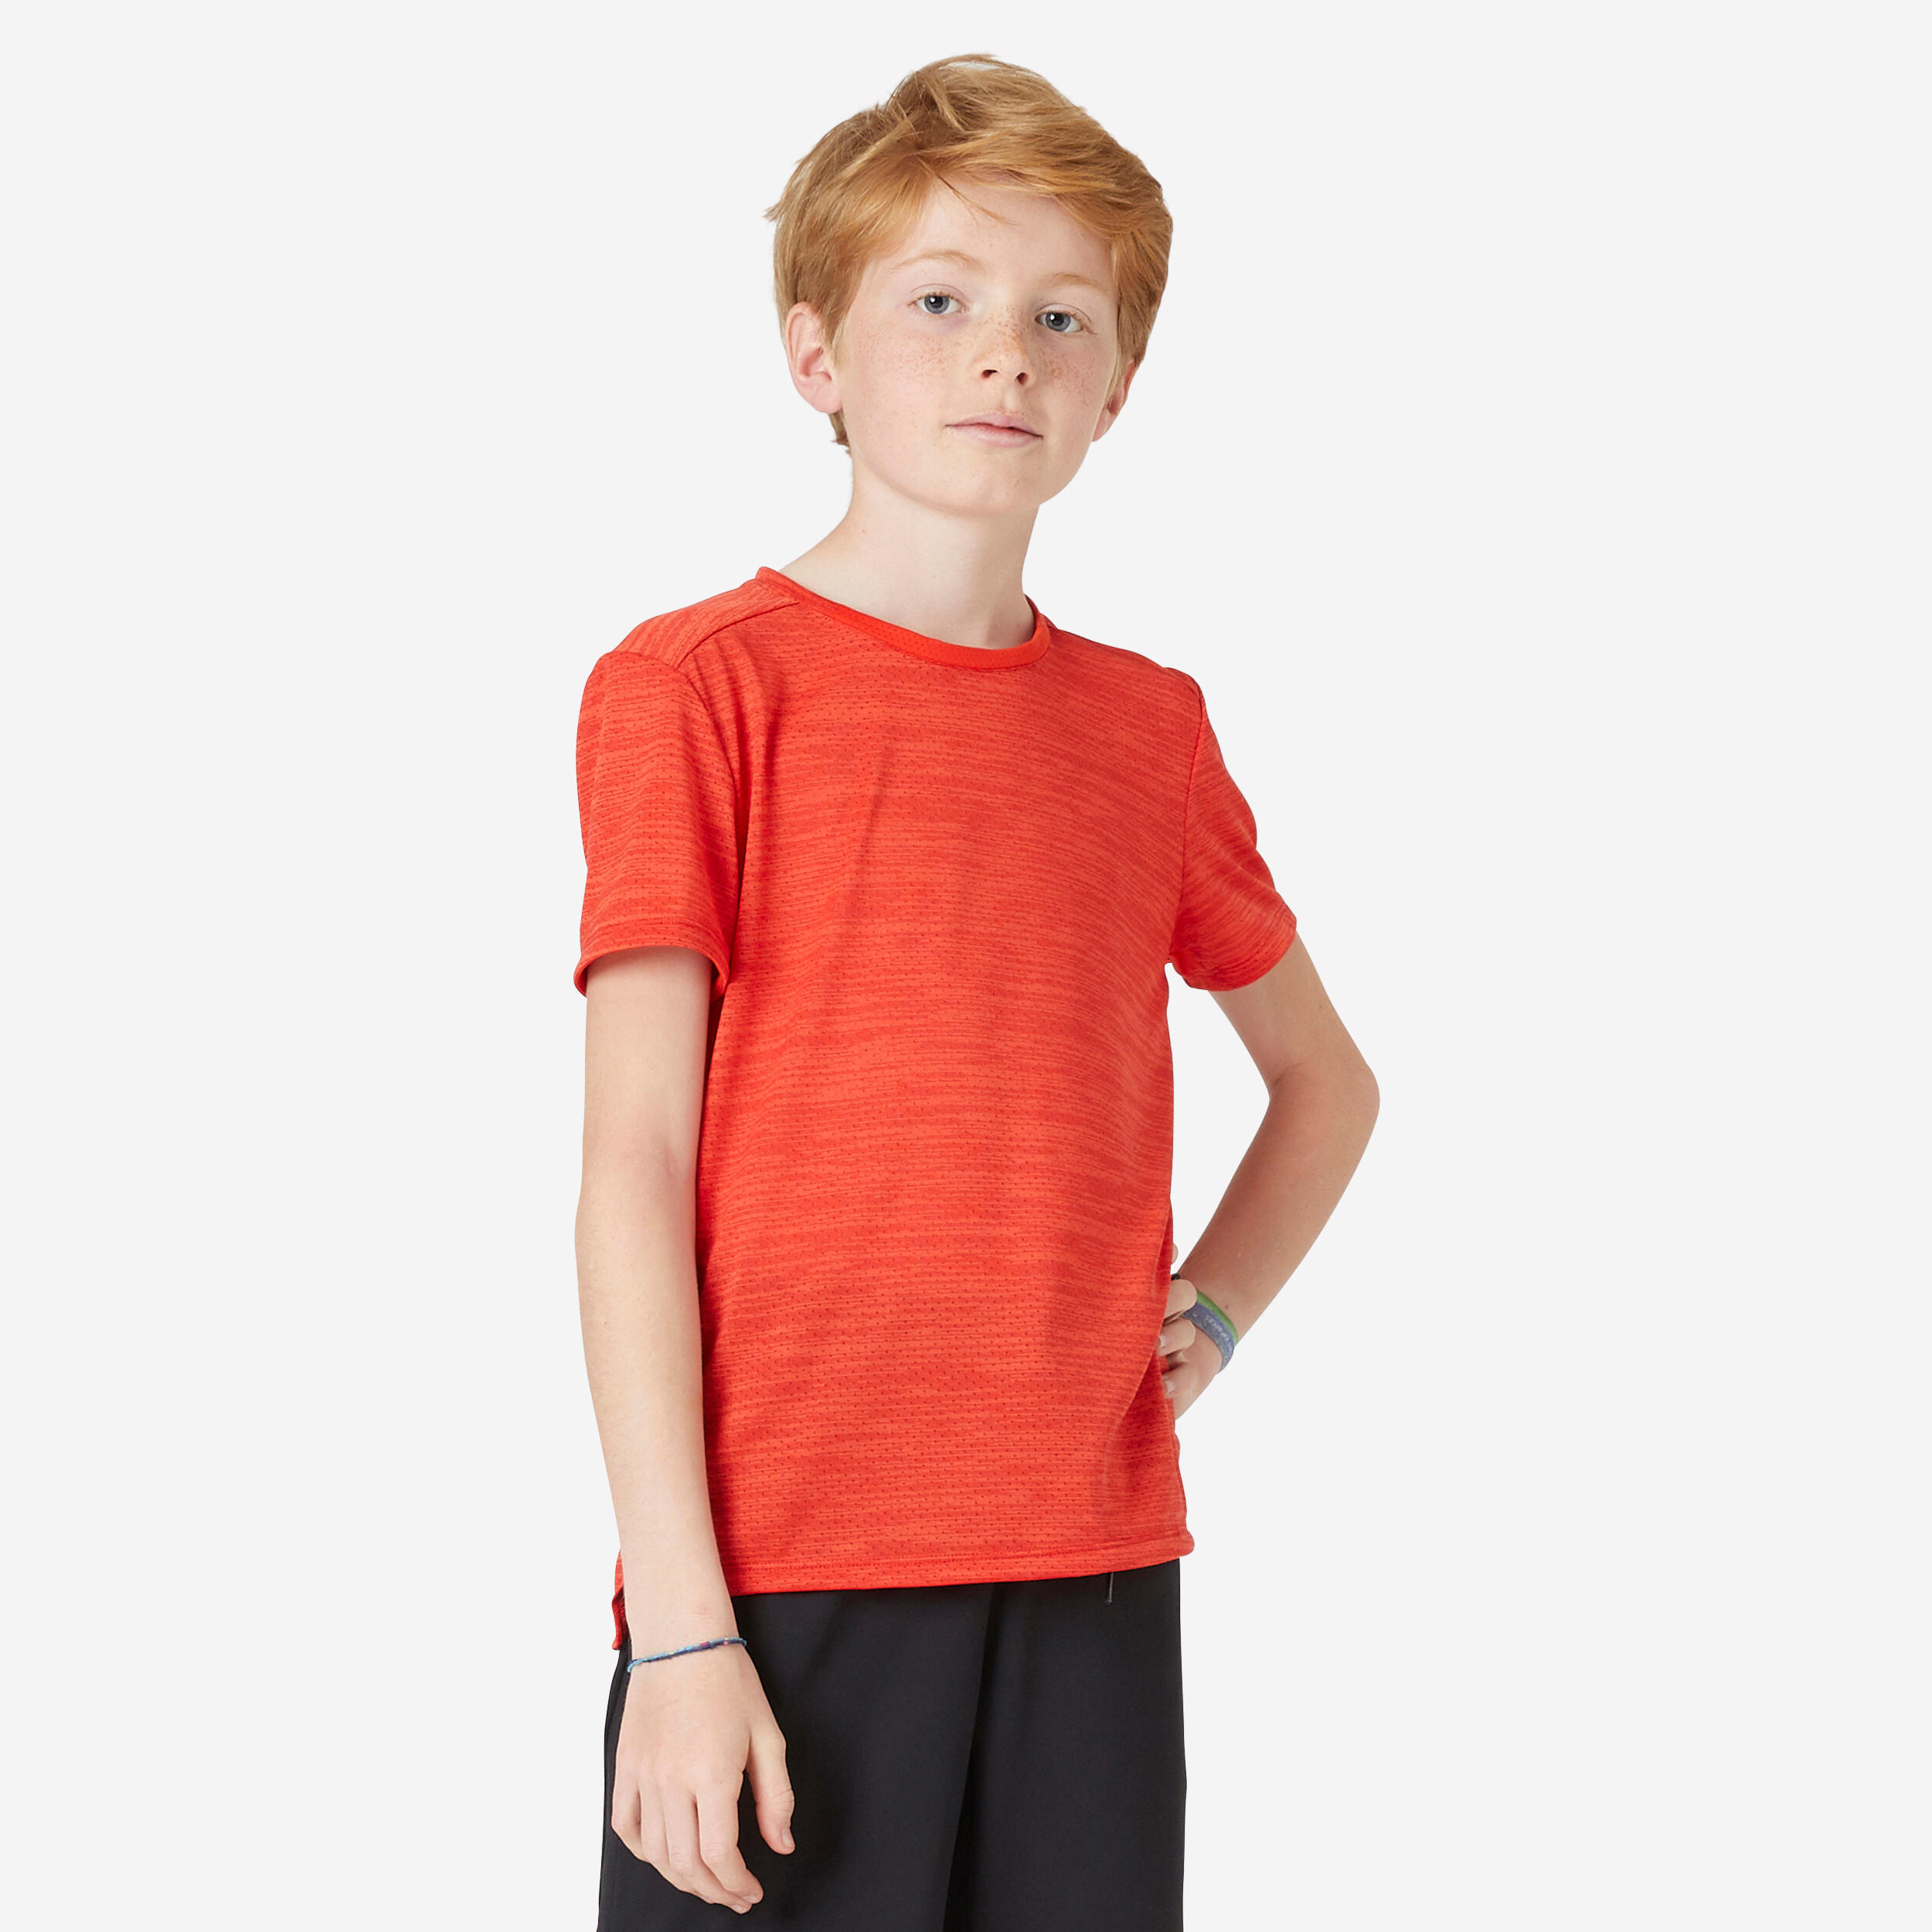 Kids' Synthetic Breathable T-Shirt S500 - Red 1/6